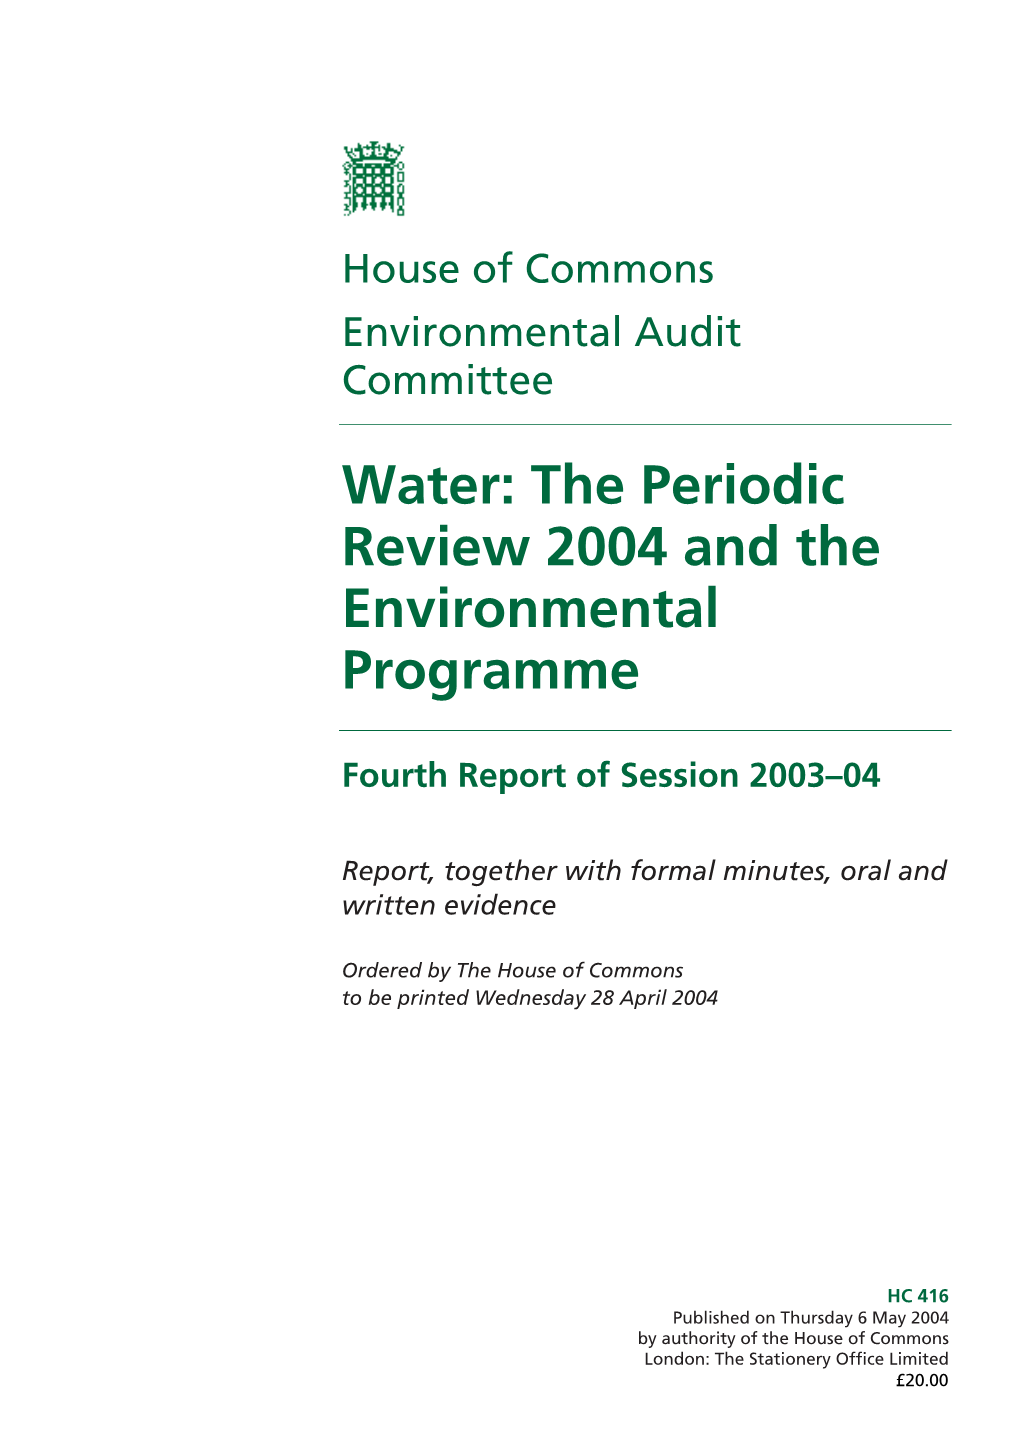 Water: the Periodic Review 2004 and the Environmental Programme